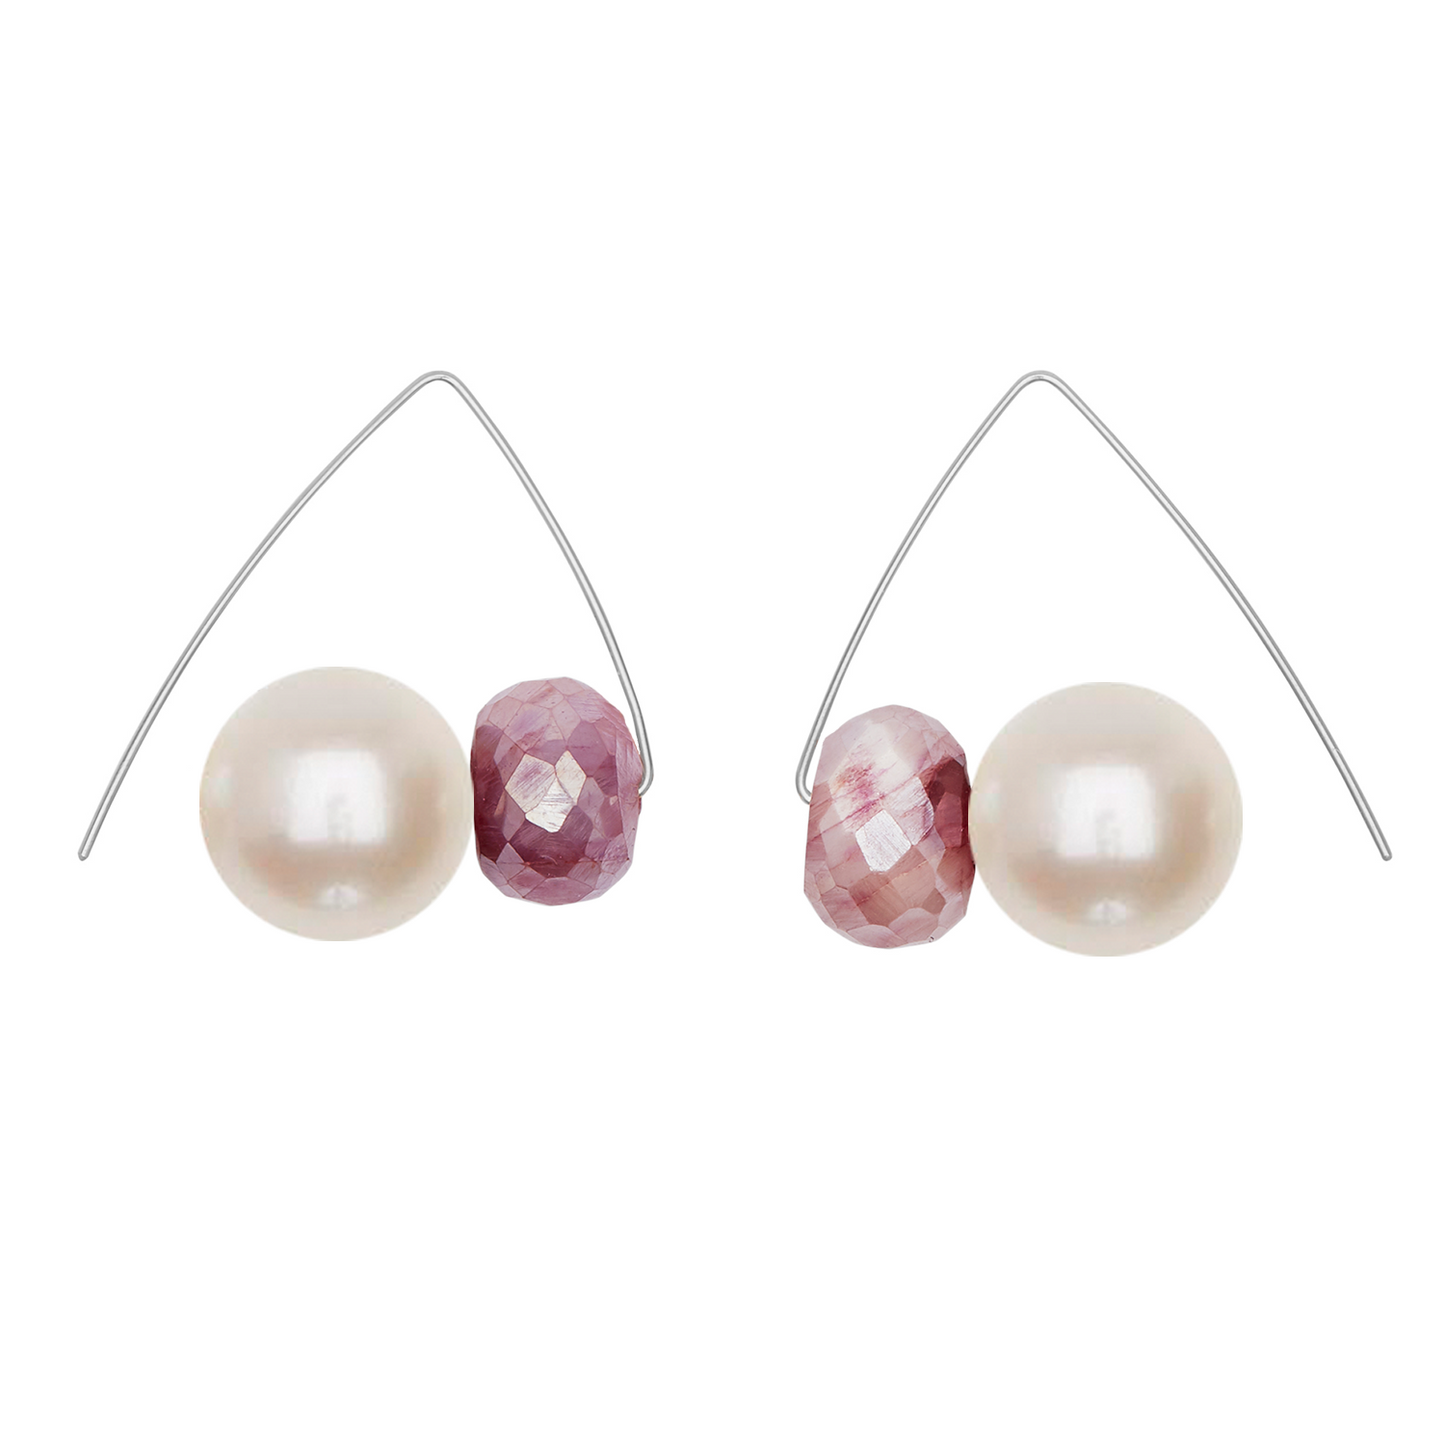 Pink Moonstone Gemstones with Round Freshwater Pearls